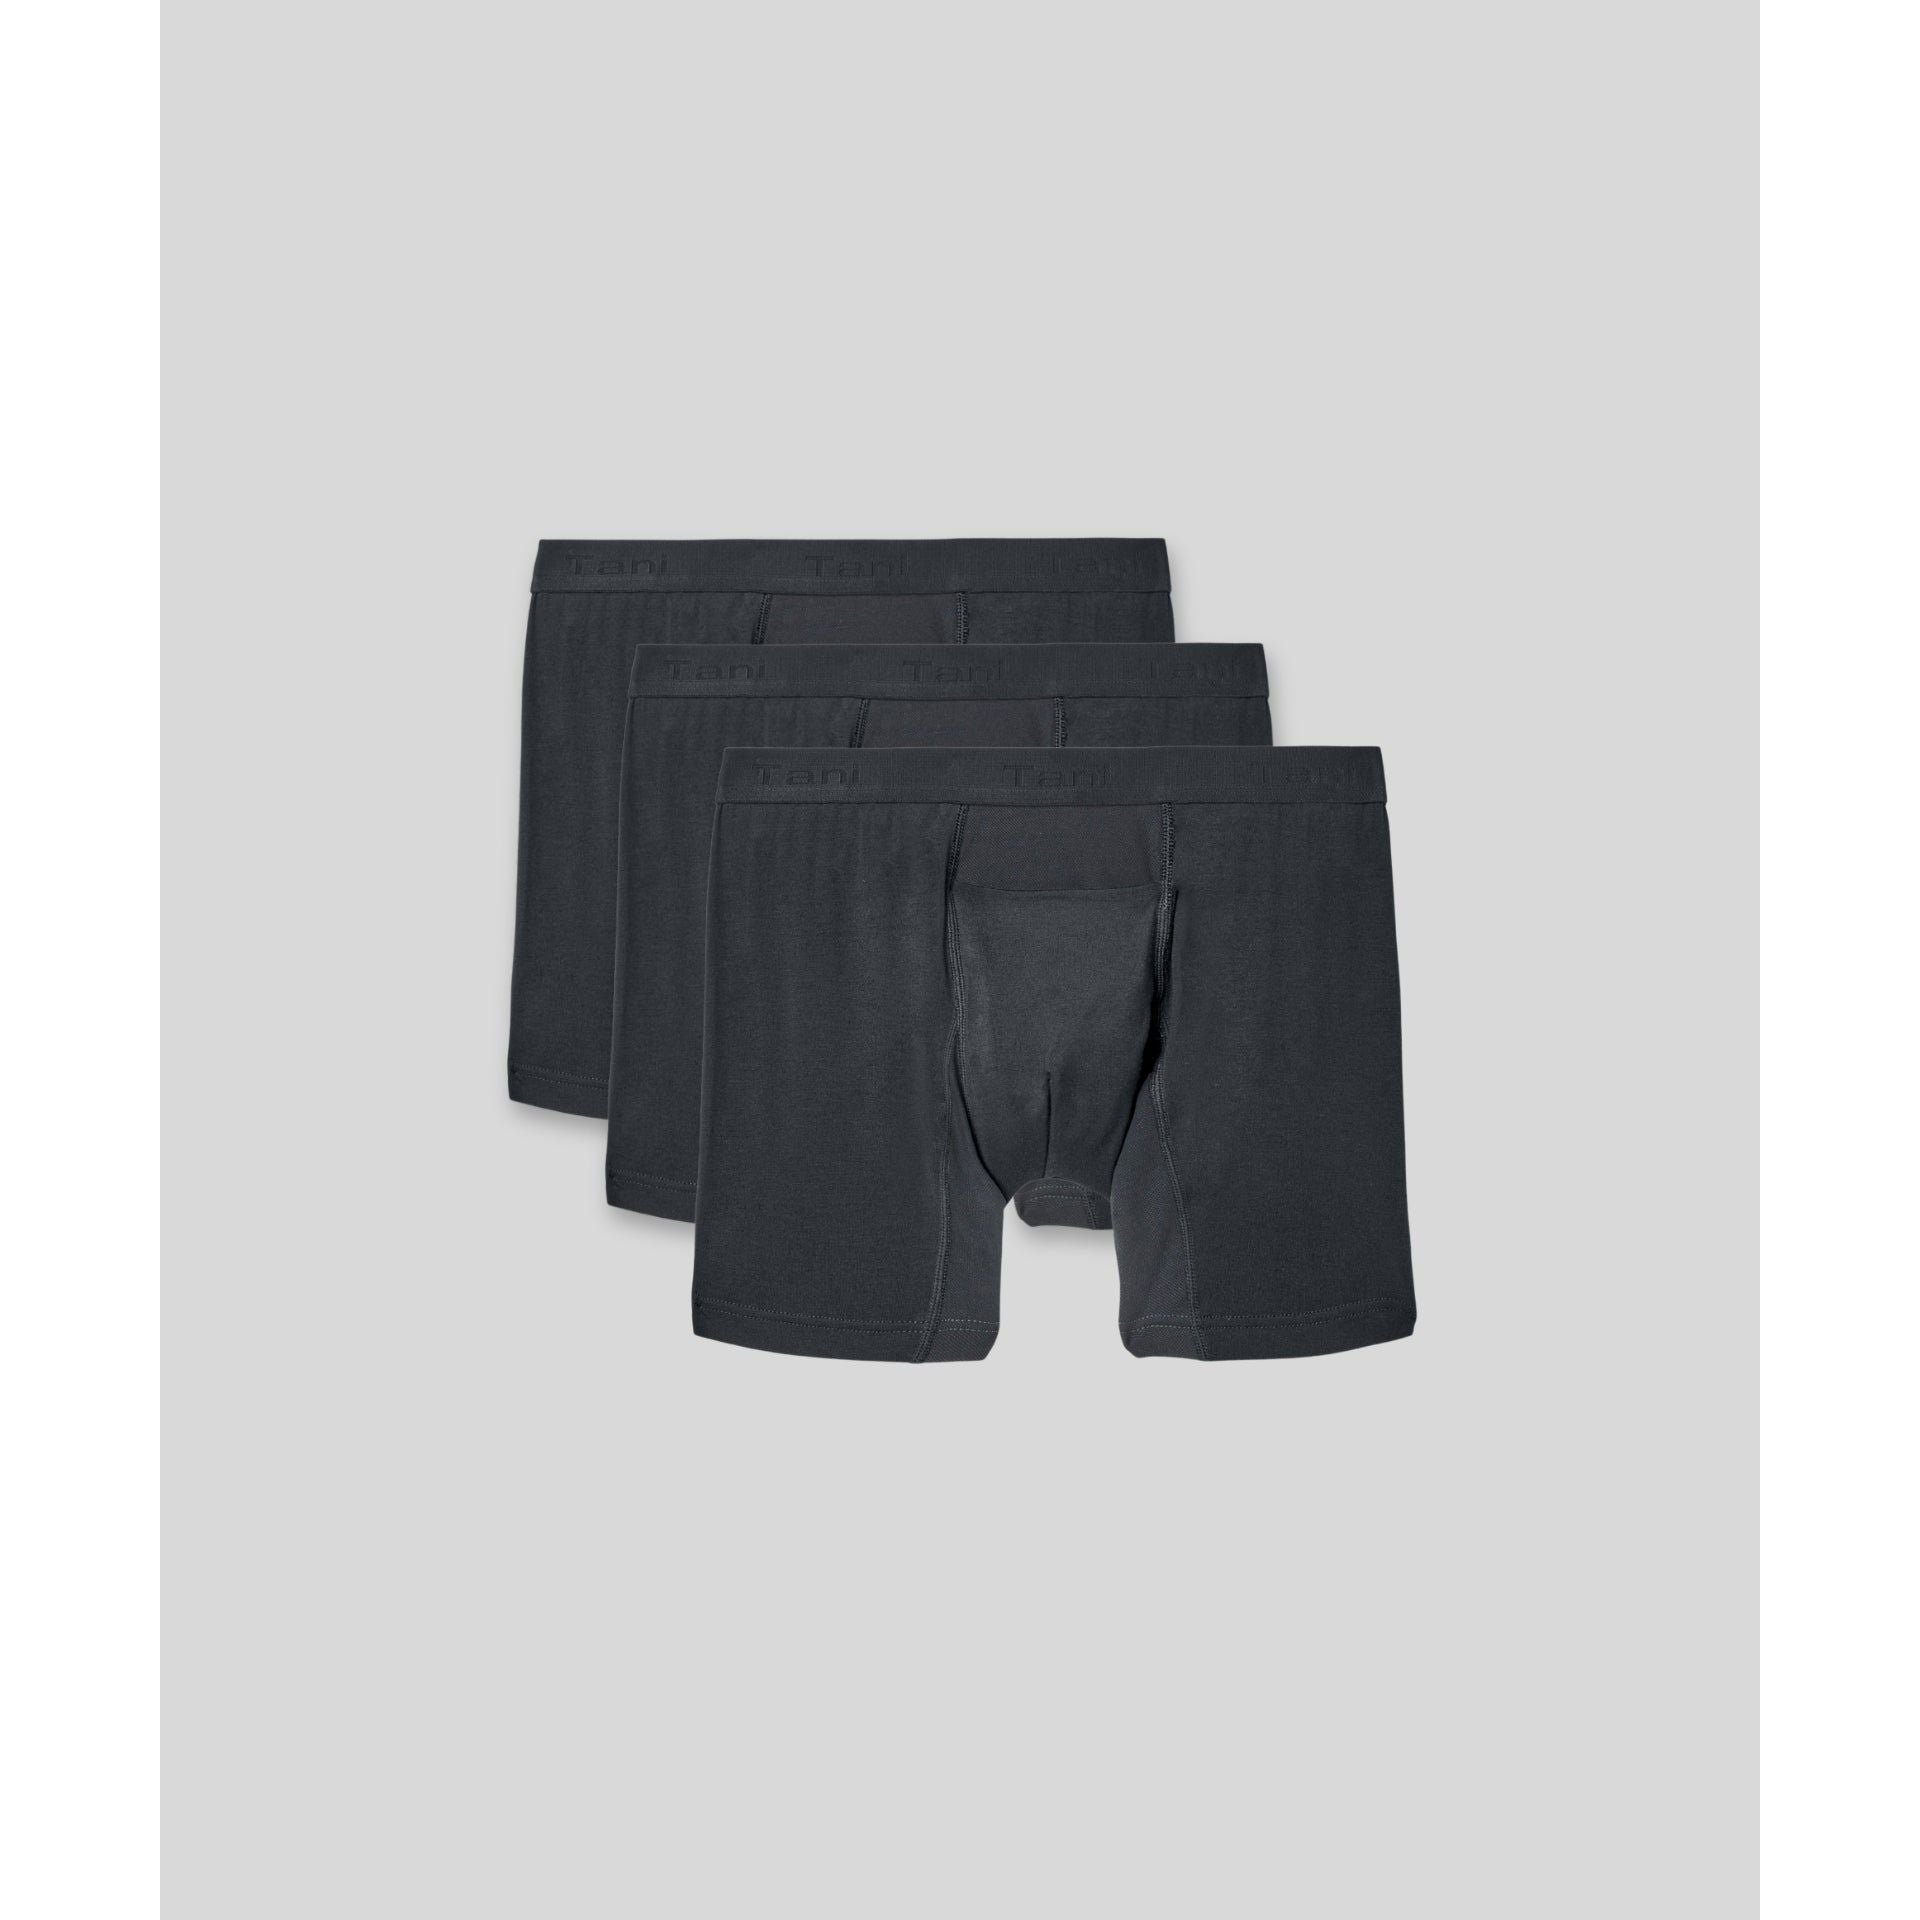 Mens Boxer Brief with Fly - 3 Pack